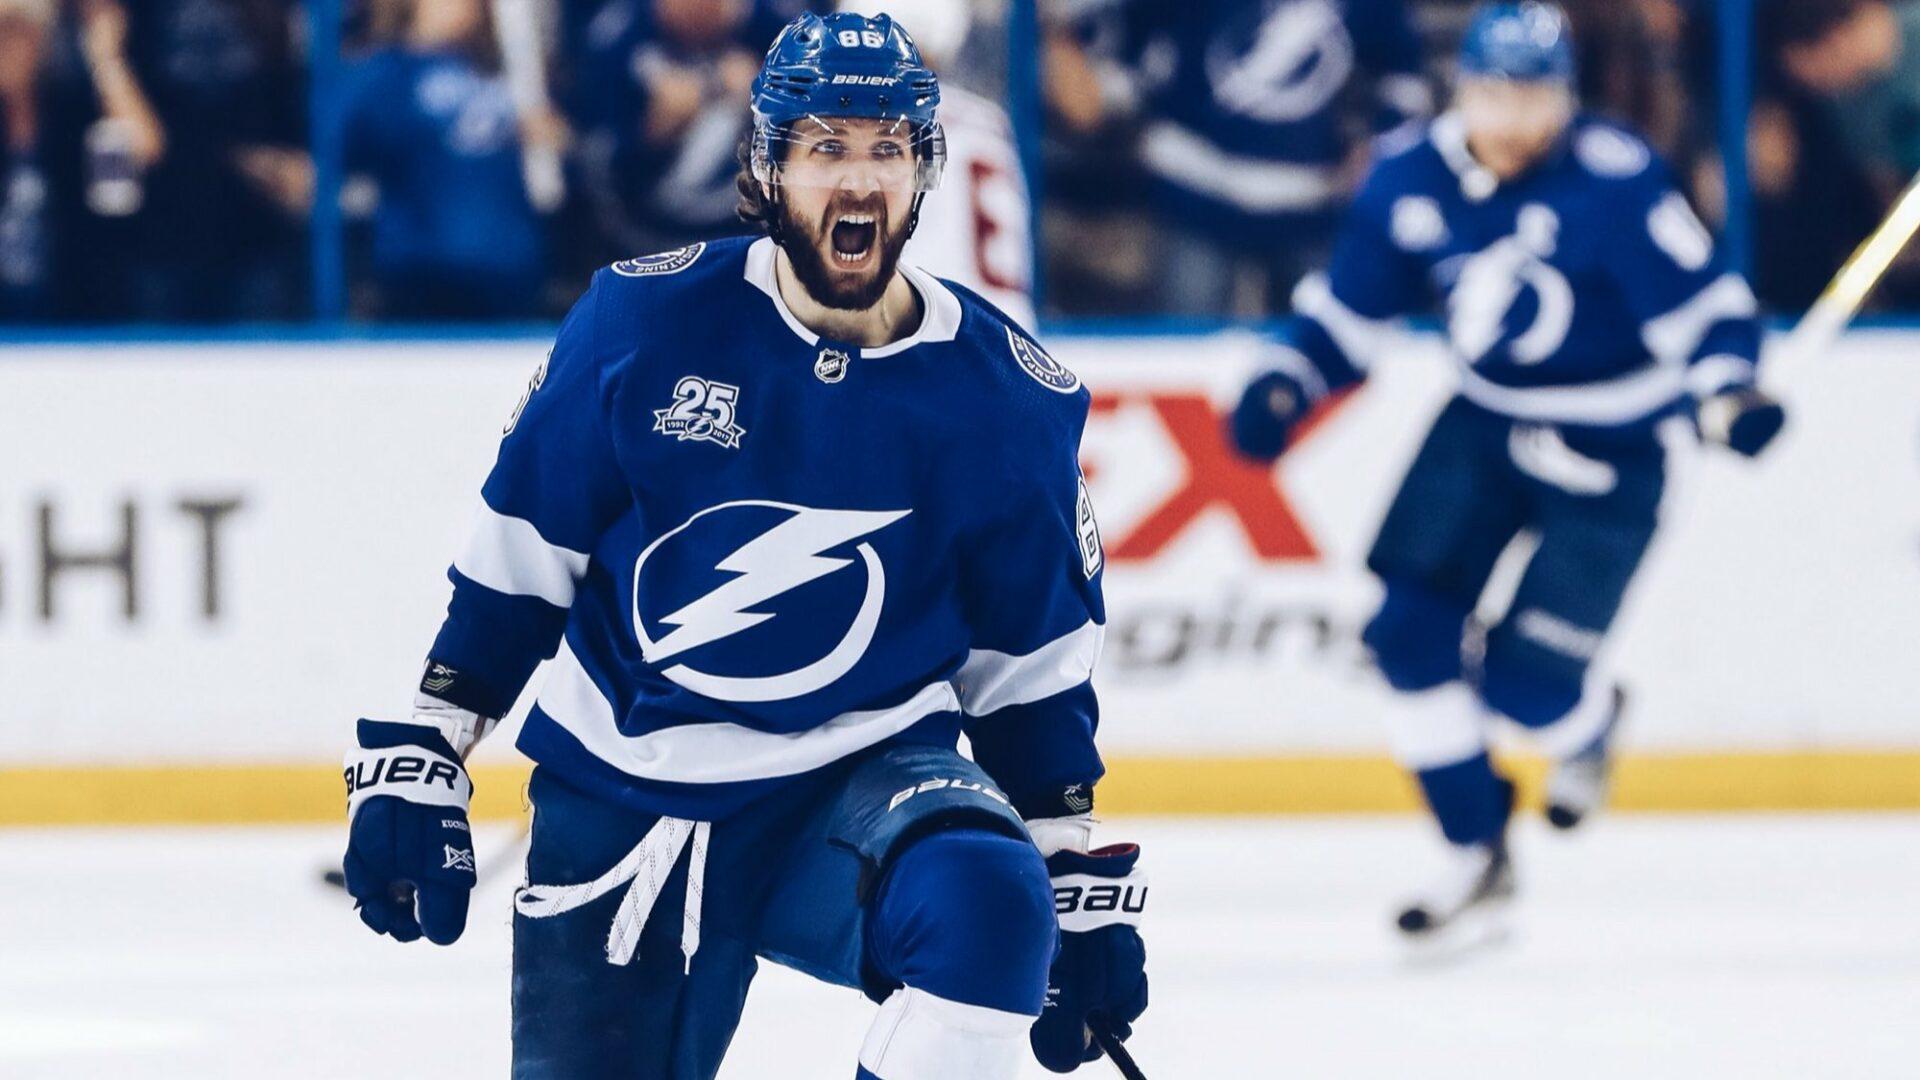 Kucherov is making a case for the Hart trophy and his point prop has been a best bet all season